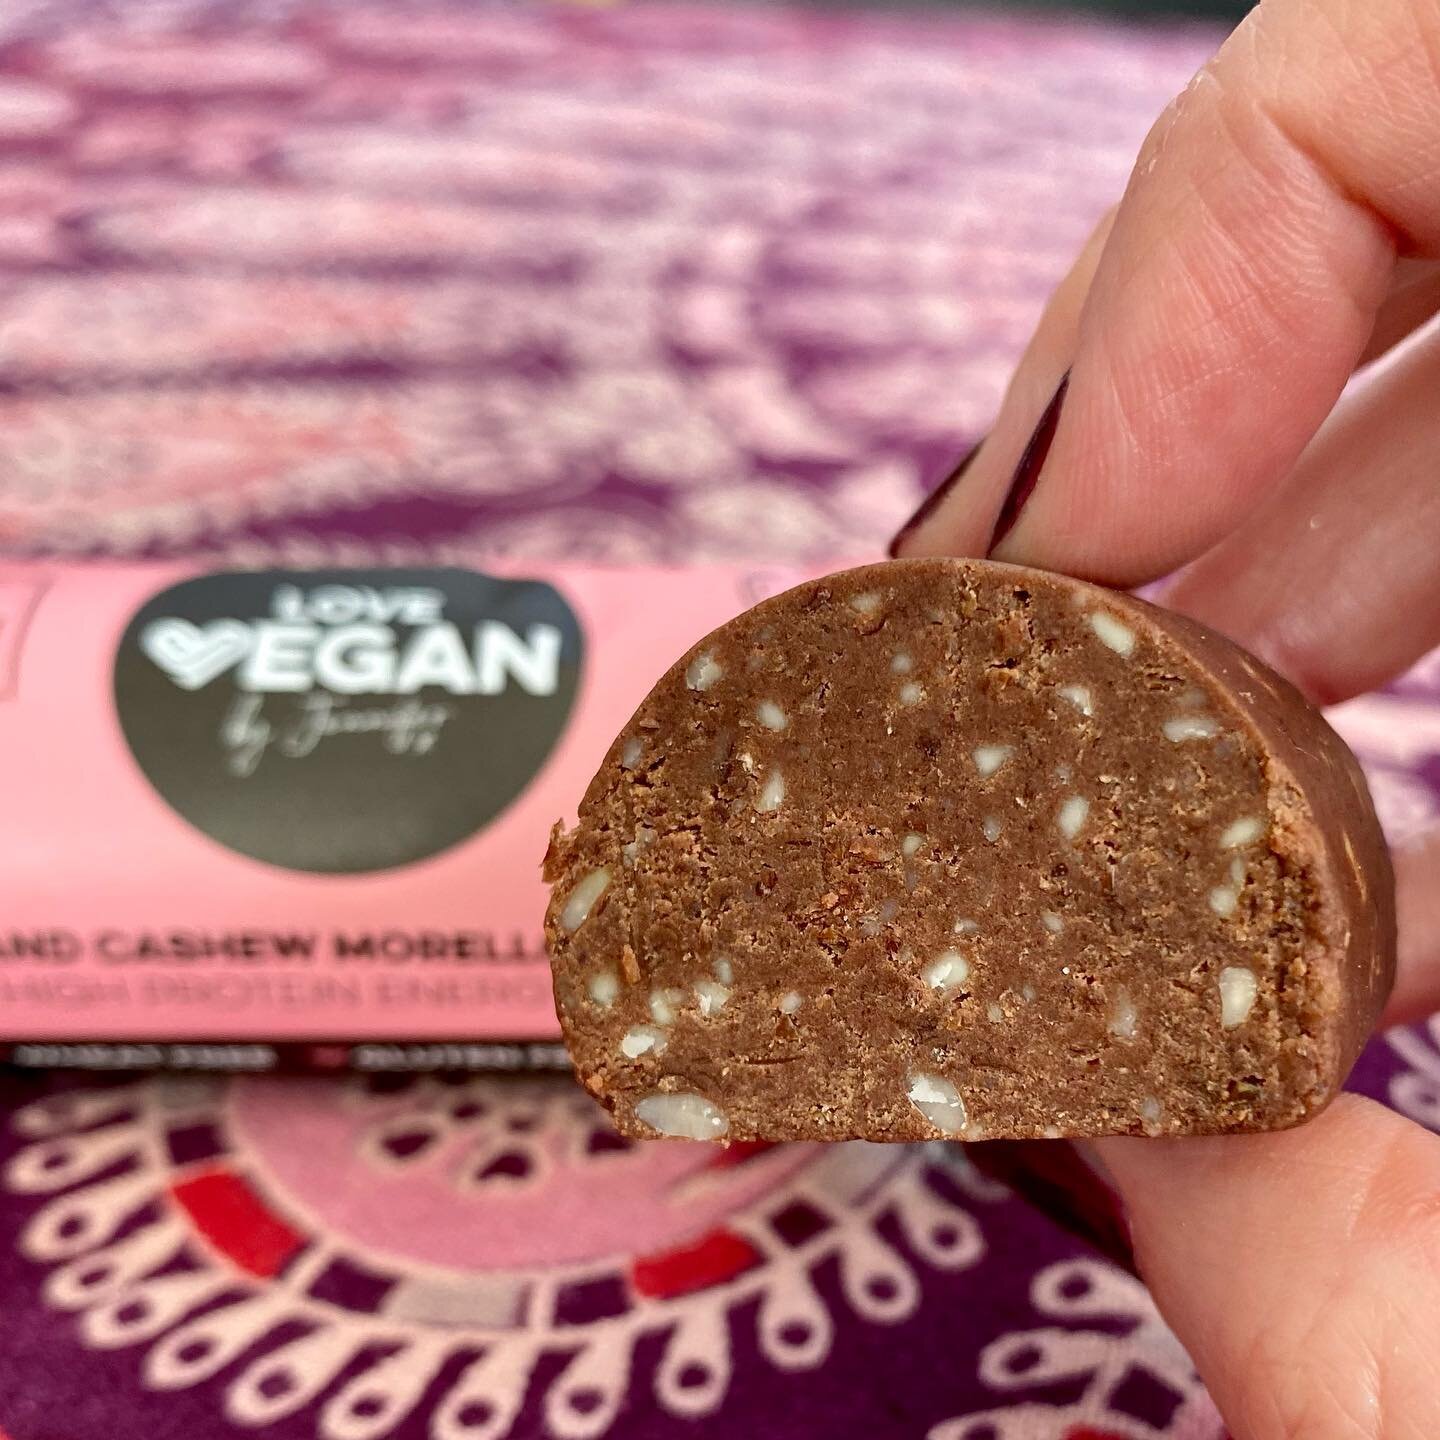 This week were getting up close and personal with our HIGH PROTEIN energy bites! They are the perfect way to refuel after a work-out or to simply get some added protein into your diet. This cacao and morello cherry flavour in this photo is sooooo tas